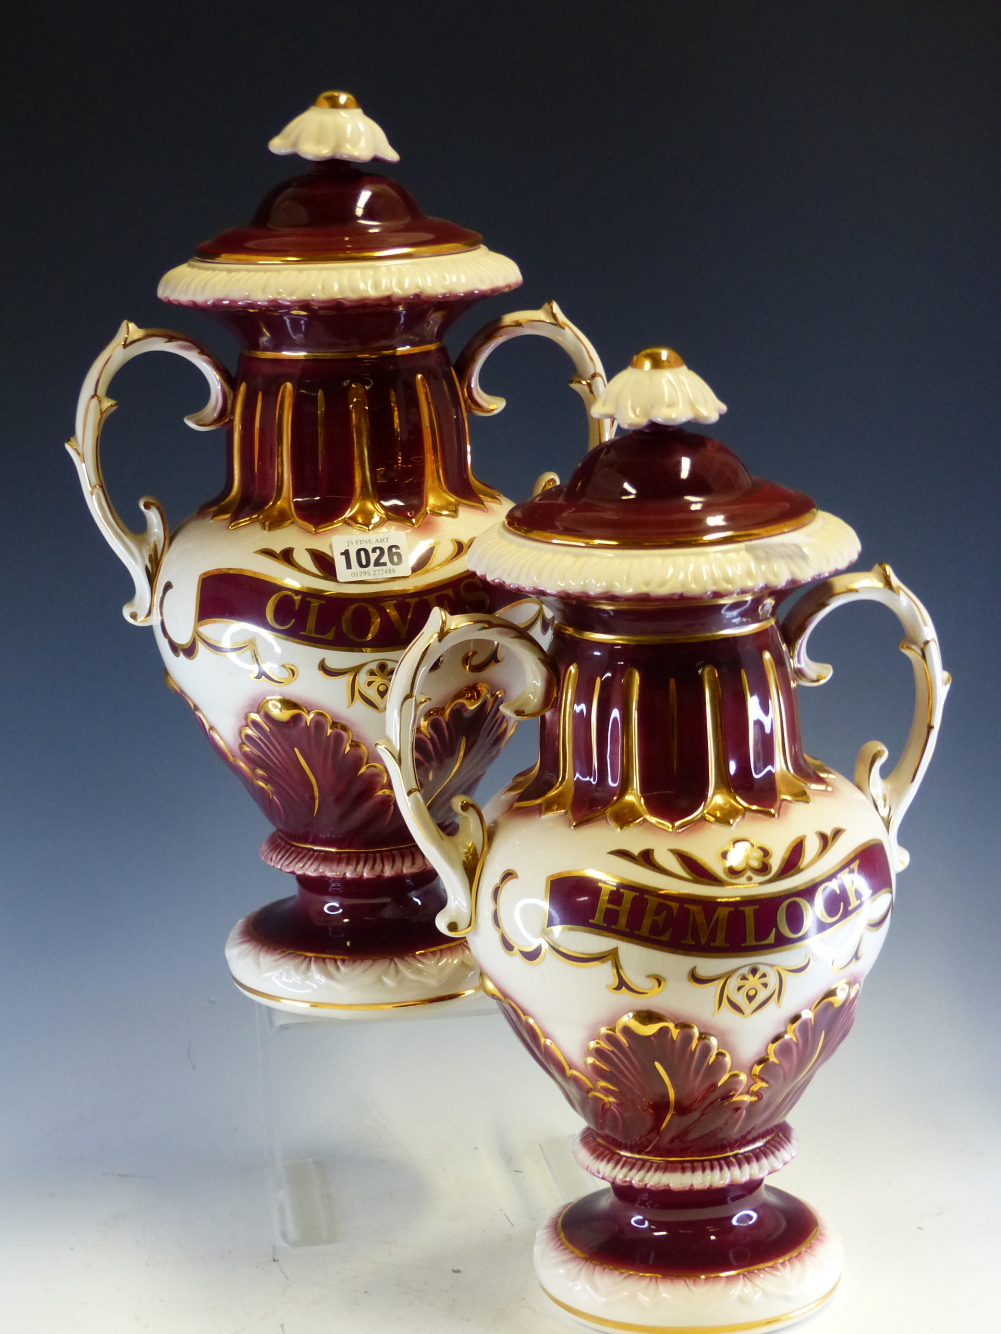 A PAIR OF POTTERY TWO HANDLED BALUSTER JARS AND COVERS LABELLED HEMLOCK AND CLOVES IN GILT ON A WINE - Image 2 of 4